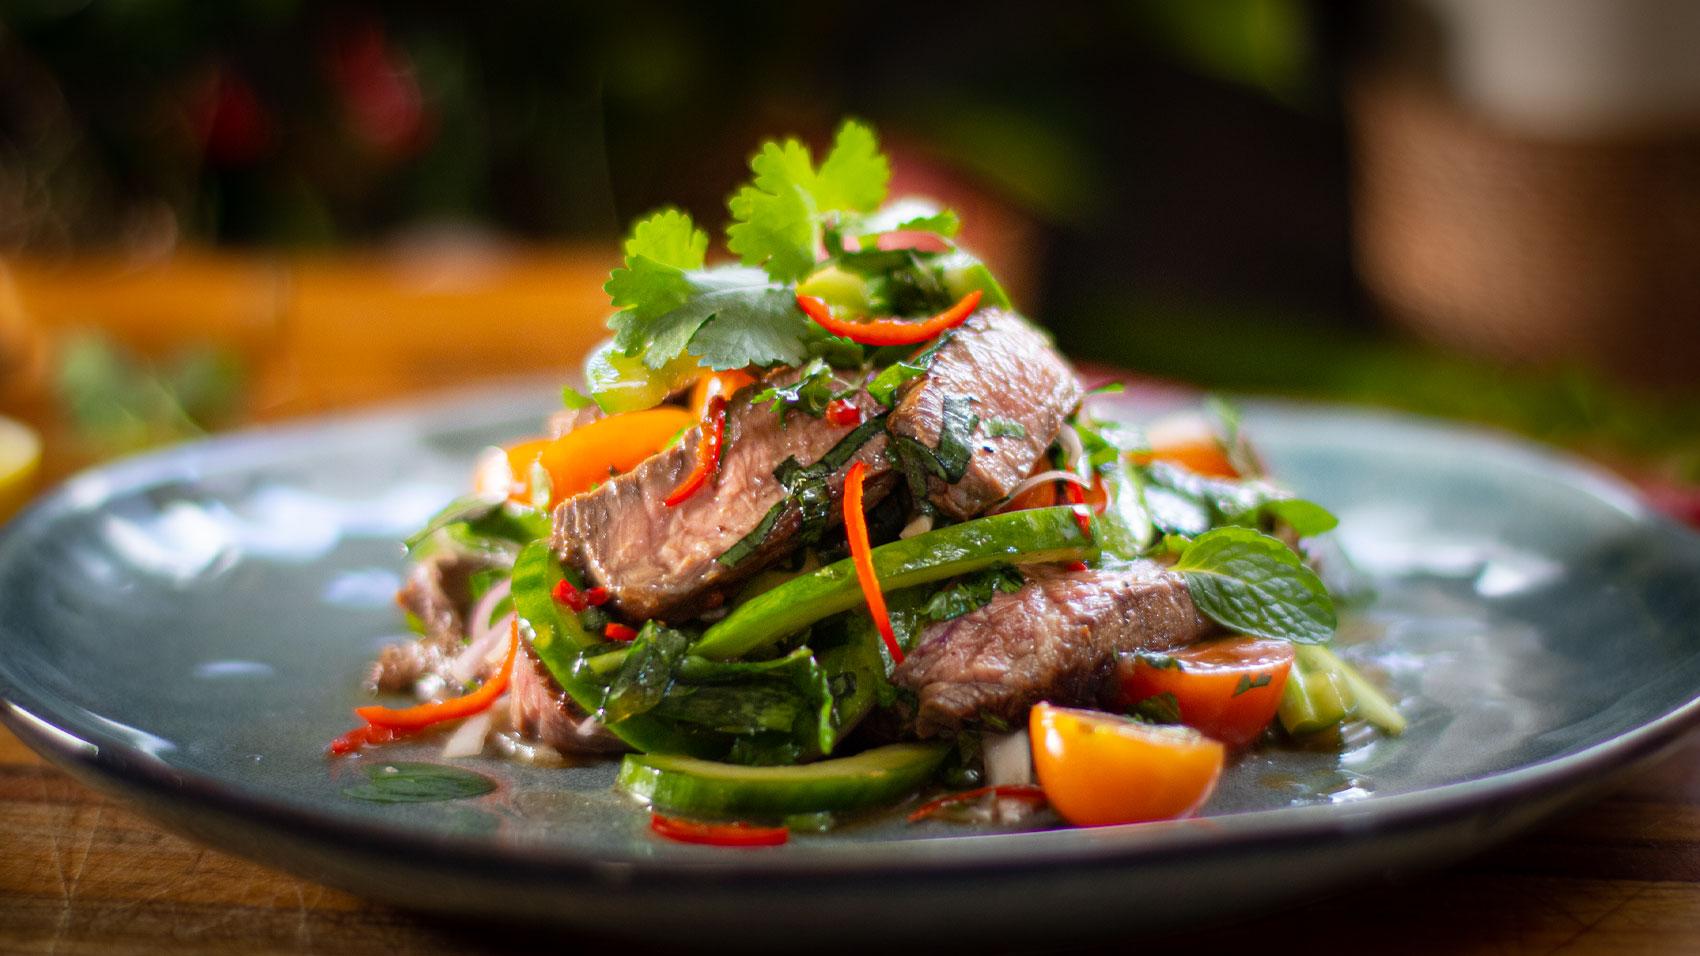 Discover the Perfect Balance of Sweet, Spicy, and Tangy in Our Thai Beef Salad